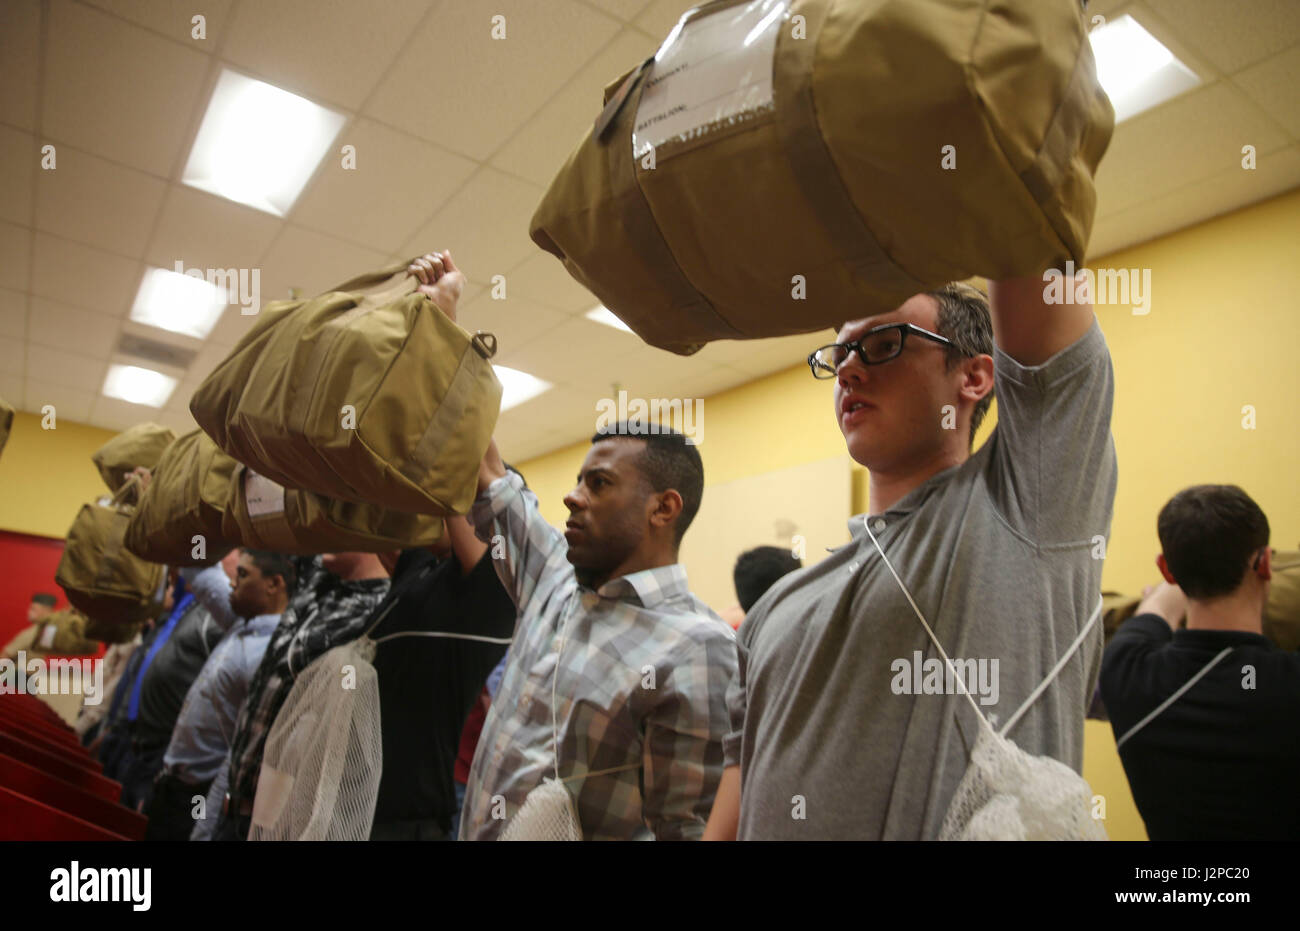 Recruits from Hotel Company, 2nd Recruit Training Battalion, hold up their war bags during receiving at Marine Corps Recruit Depot San Diego, April 17. The war bags are part of the recruits’ initial gear, and they will receive the rest of their gear at the end of the week. Annually, more than 17,000 males recruited from the Western Recruiting Region are trained at MCRD San Diego. Hotel Company is scheduled to graduate July 14. Stock Photo